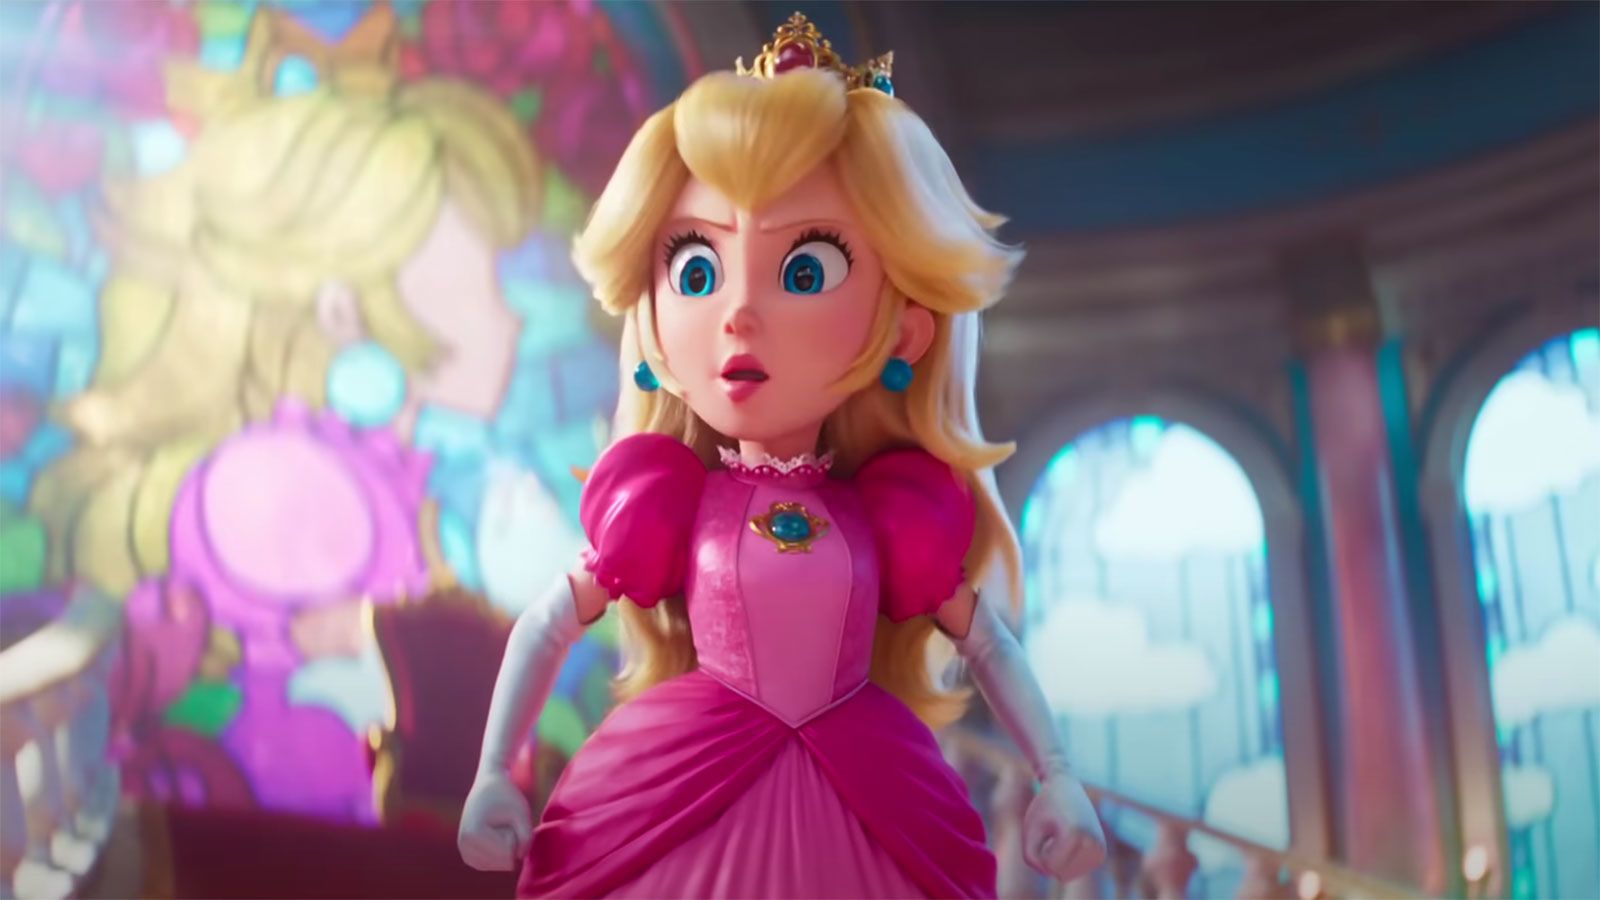 Super Mario Bros. Movie' trailer shows being a hero isn't all fun and games